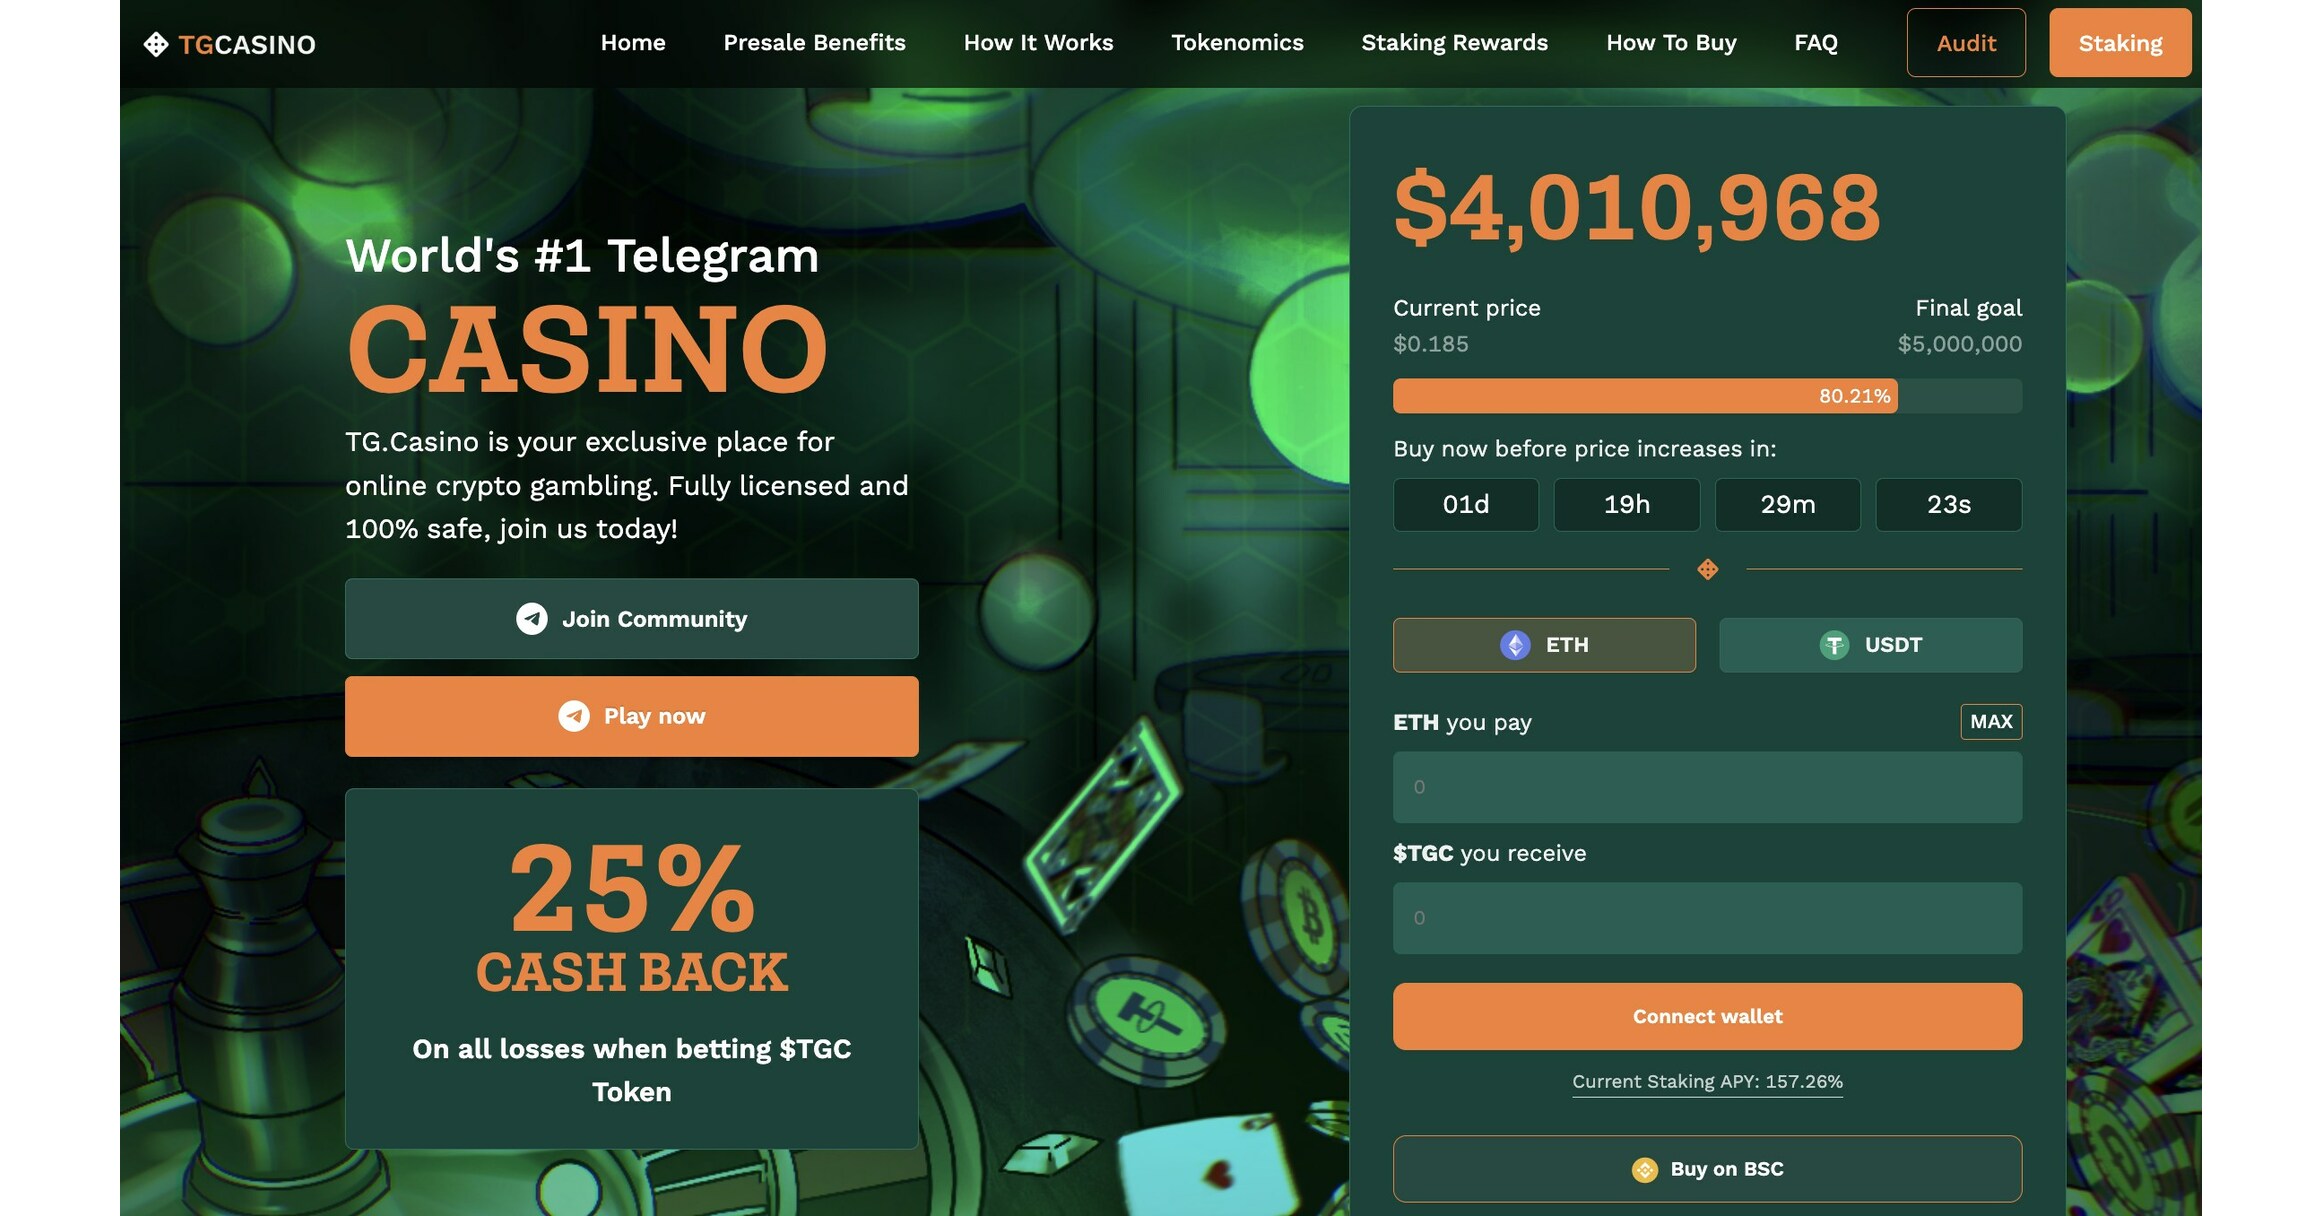 GameFi Token TG.Casino Raises $4m After $45m Wagered As Whale Traders Buy